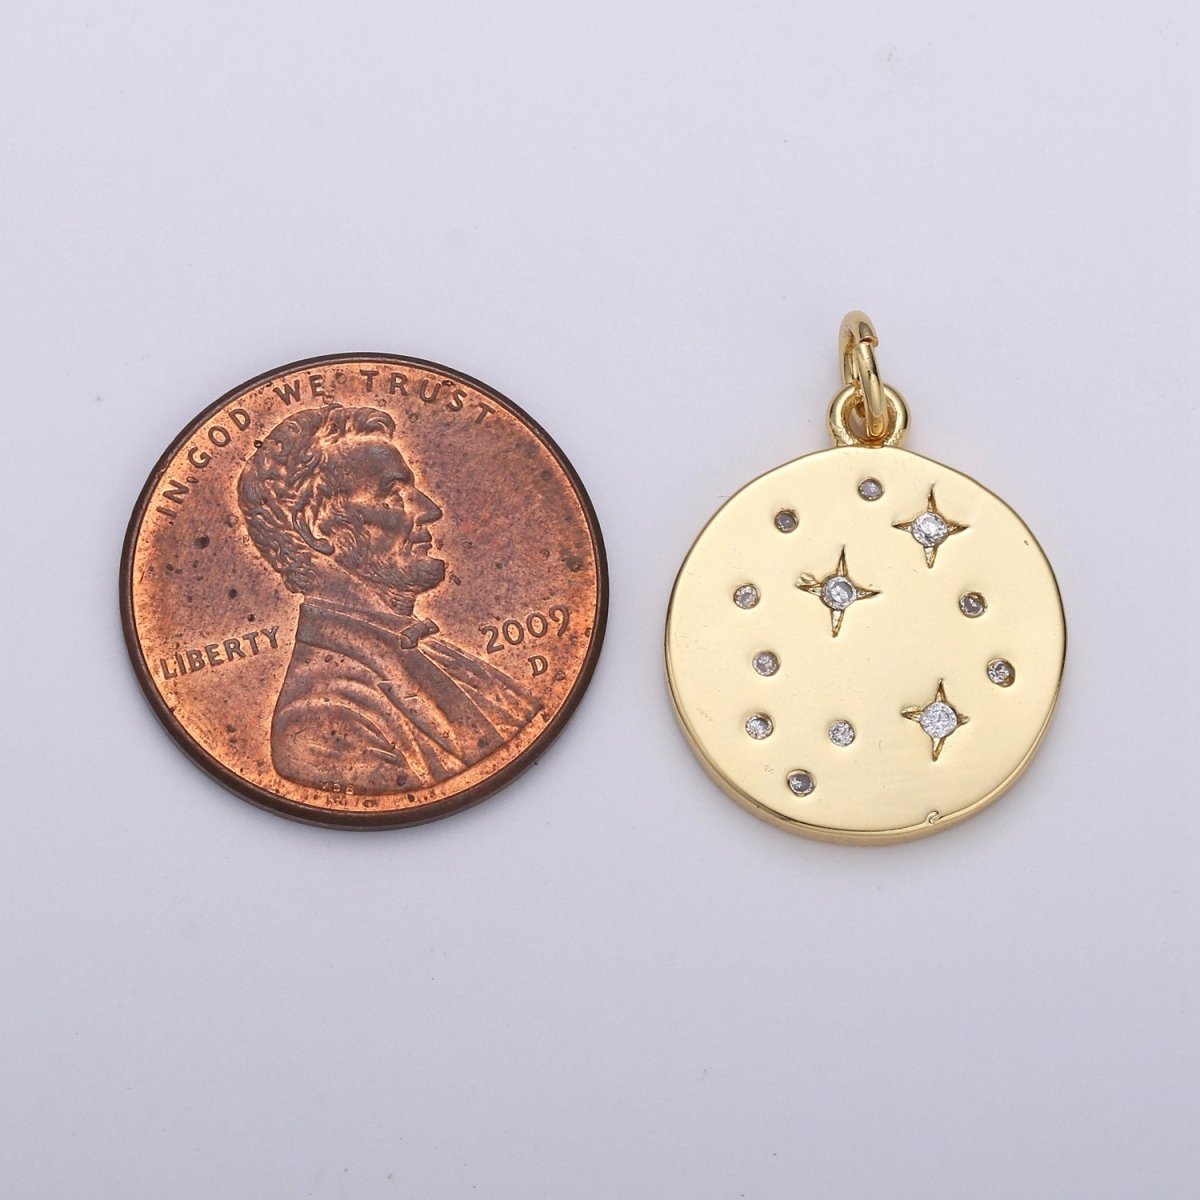 Gold Star Jewelry Gold Sky Galaxy Charm Jewelry Making Supply 24K Gold Filled Findings Silver Celestial Jewelry D-530 D-531 - DLUXCA